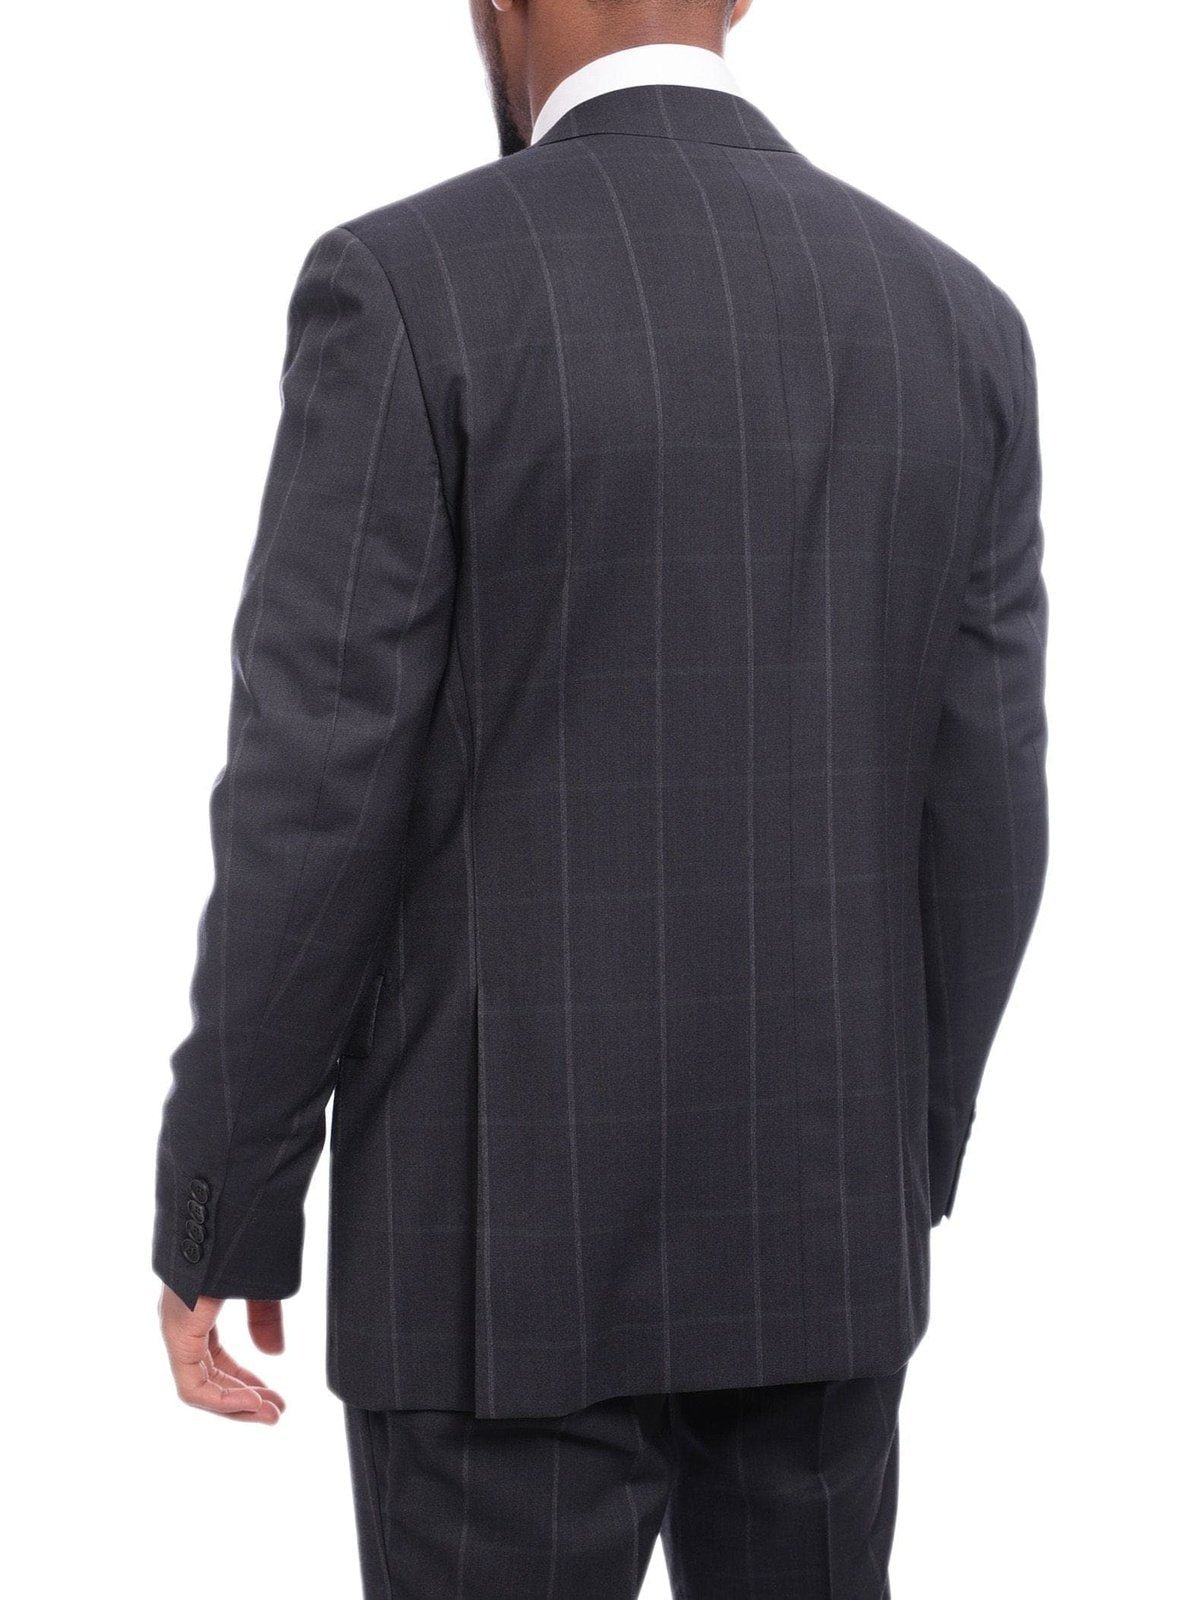 Napoli TWO PIECE SUITS Napoli Slim Fit Navy Blue Windowpane Two Button Half Canvassed Wool Suit